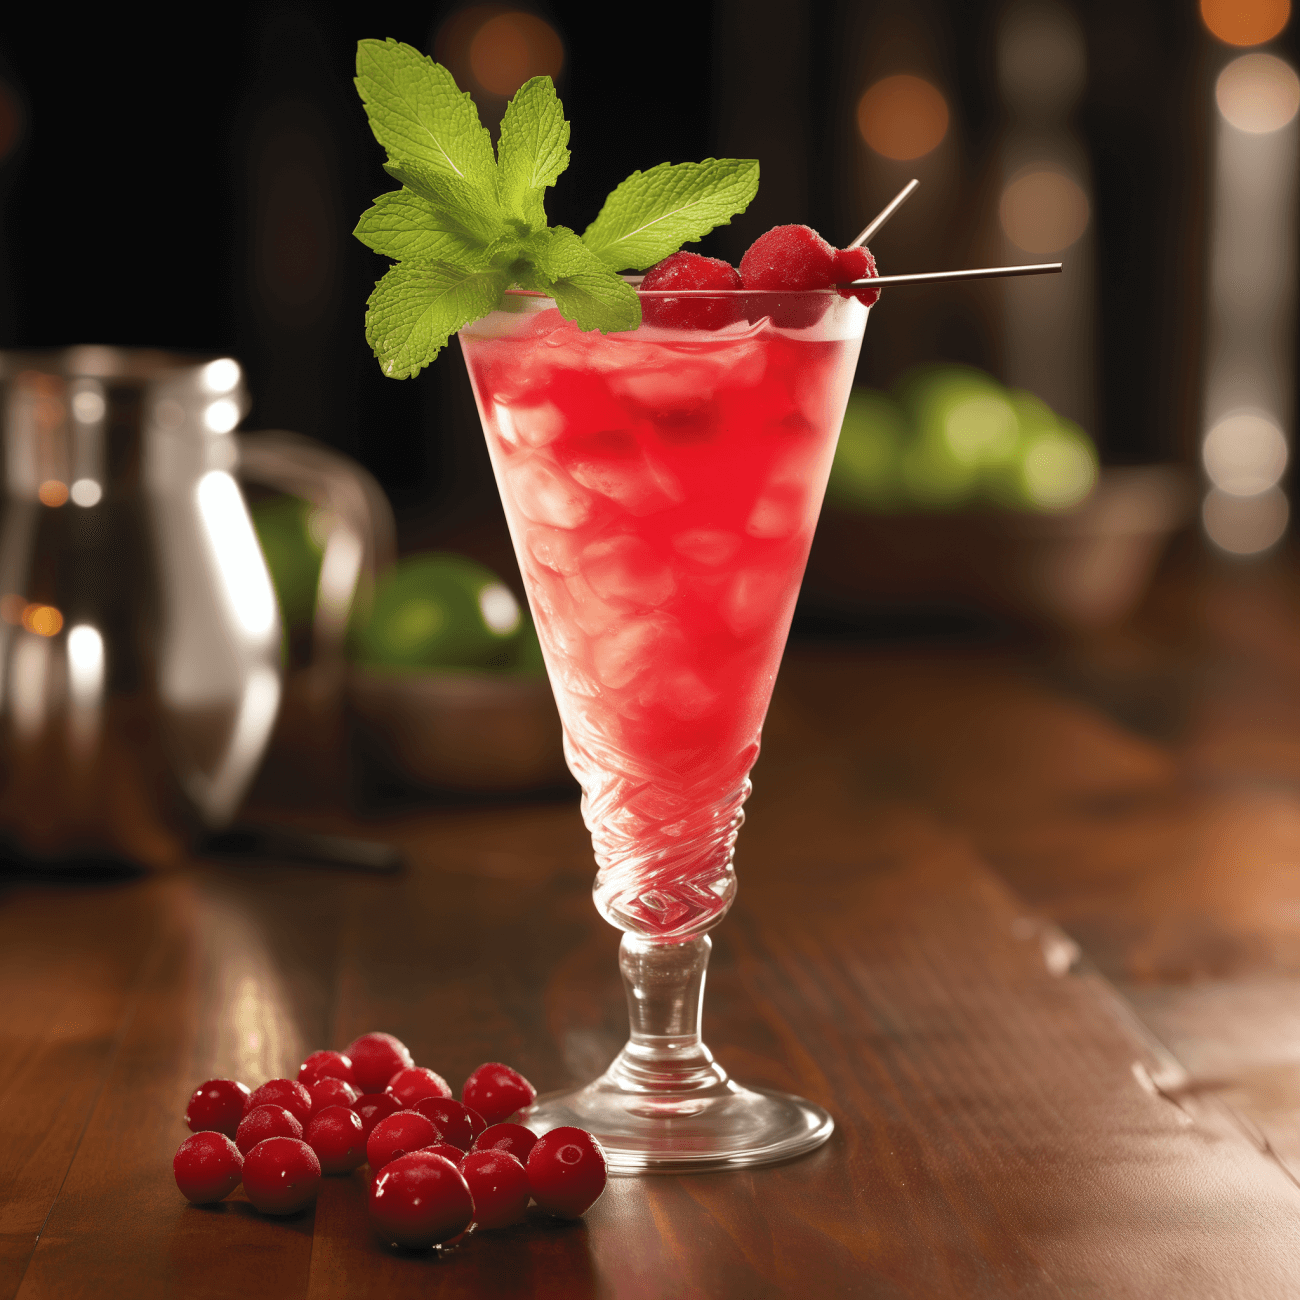 San Francisco Cocktail Recipe - The San Francisco cocktail is sweet, fruity, and slightly fizzy. The vanilla vodka adds a creamy, smooth undertone, while the Kinky Liqueur brings a burst of tropical fruit flavors. The Sprite or 7 UP adds a refreshing fizz, and the shimmer dust gives it a magical, glittering appearance.